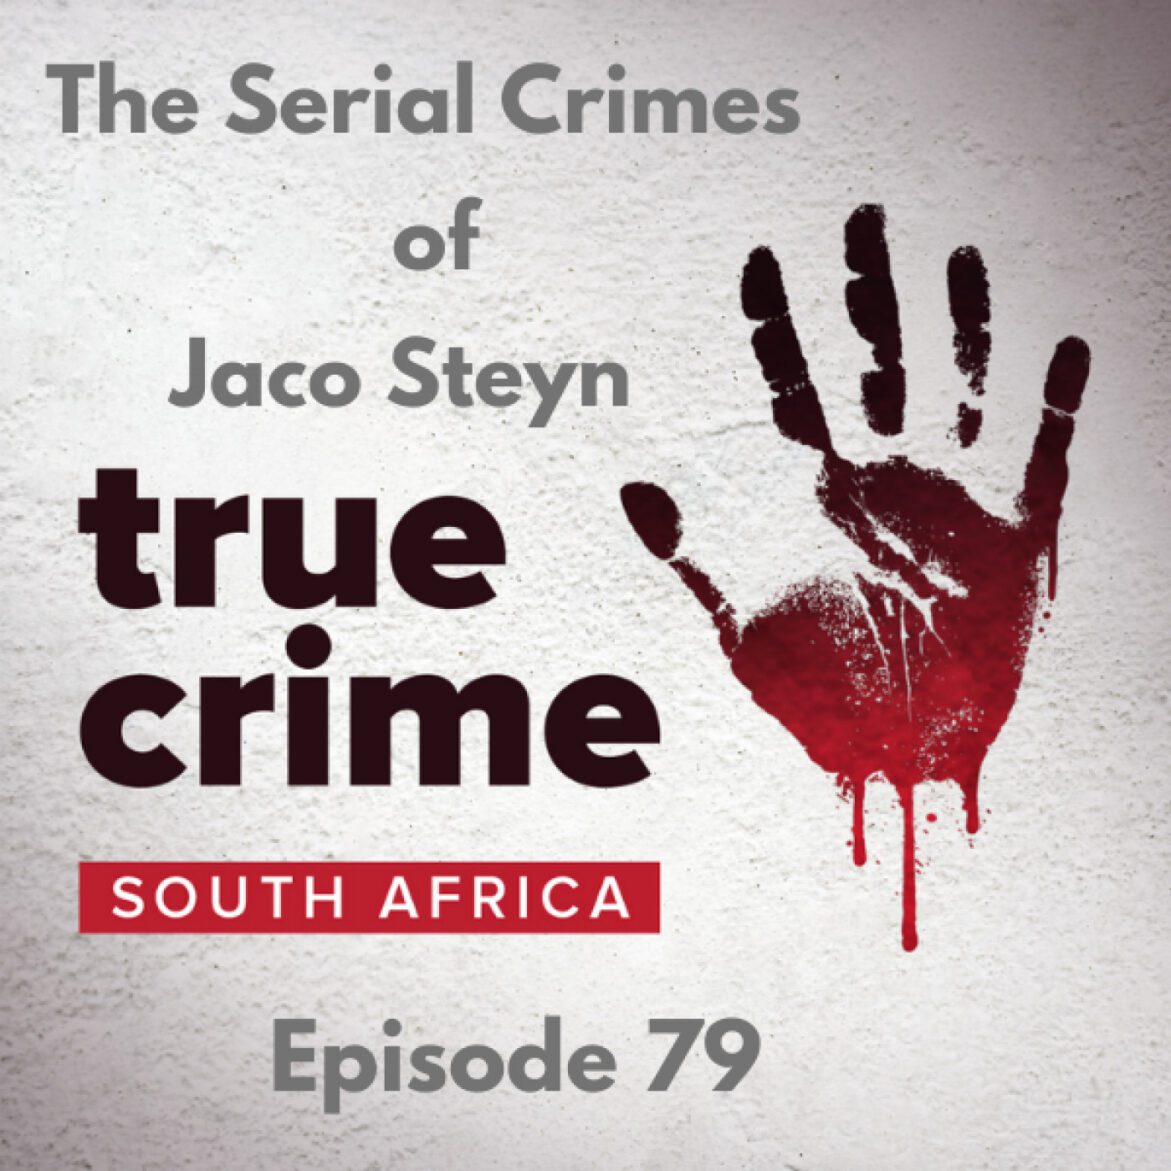 Black Podcasting - Episode 79 The Serial Crimes of Jaco Steyn